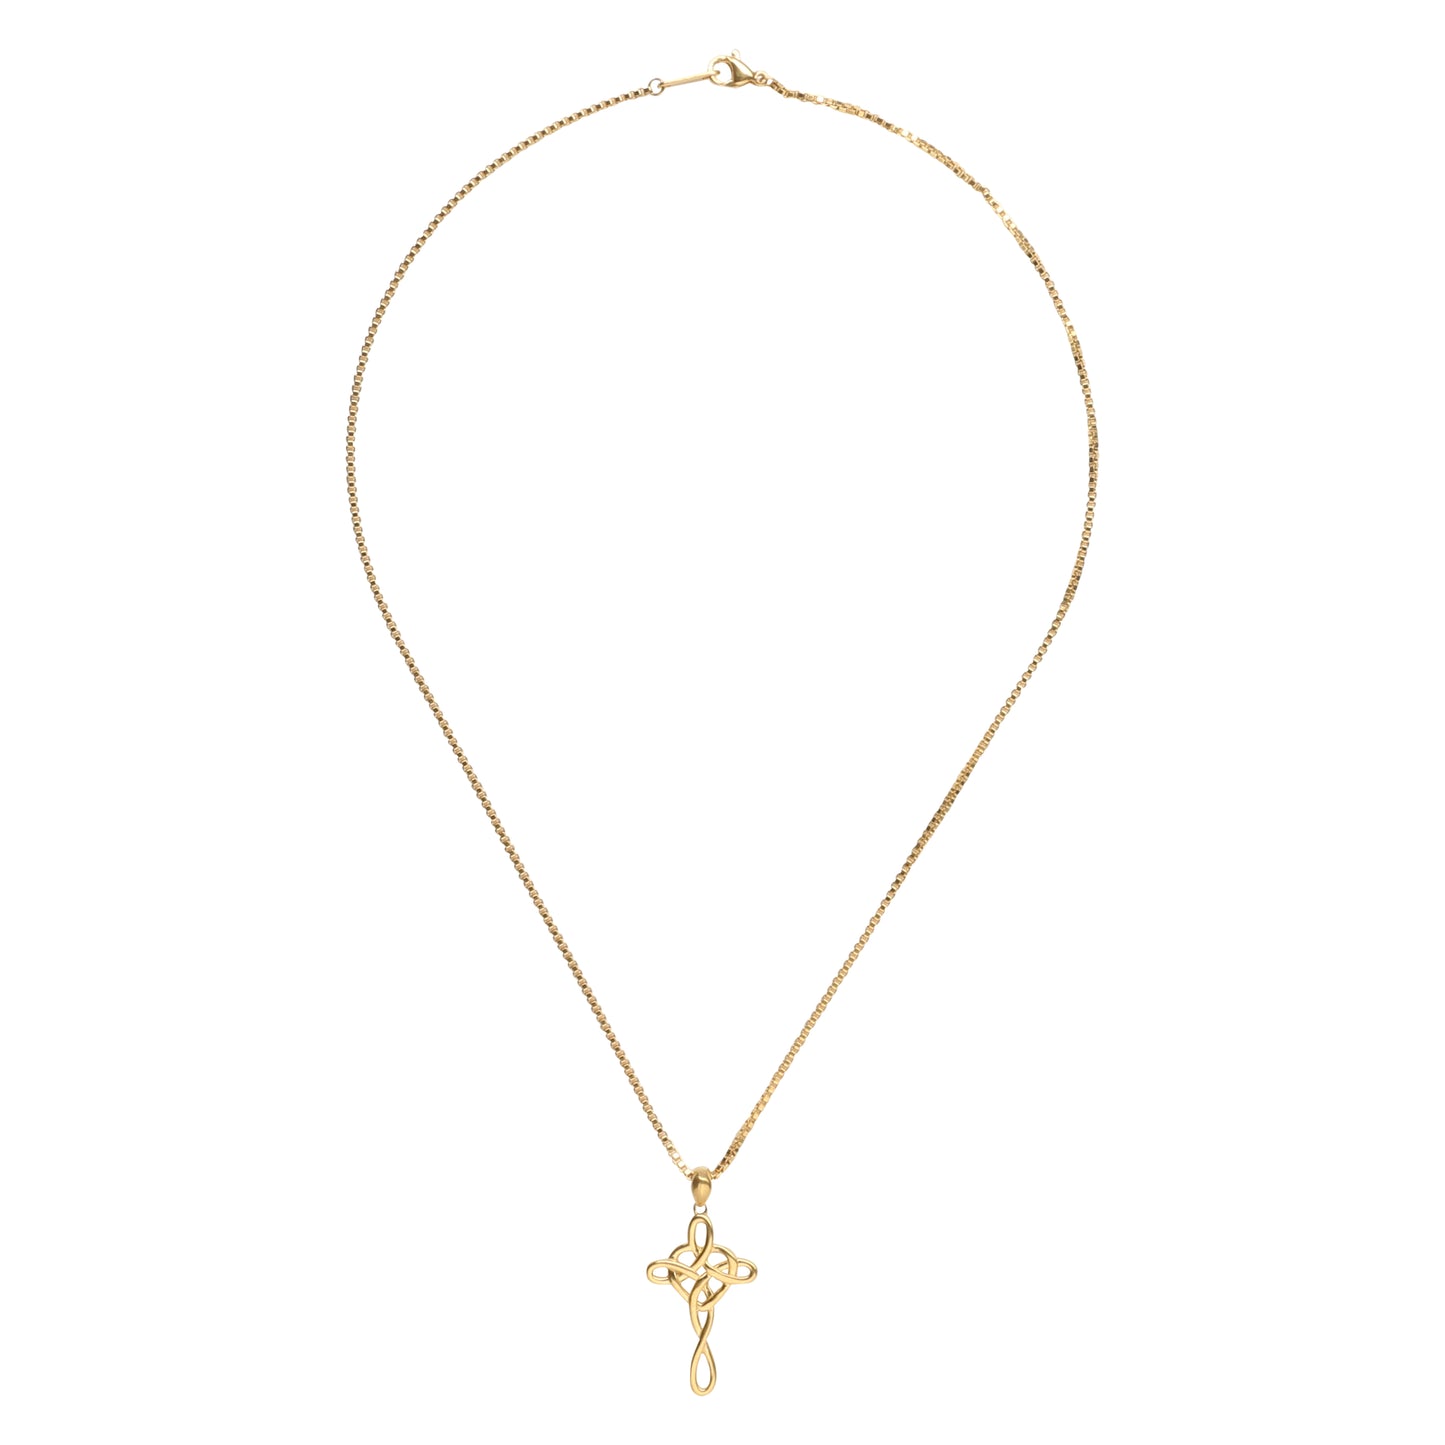 BlingStop 14K Gold Plated Infinity Cross Pendant Necklace